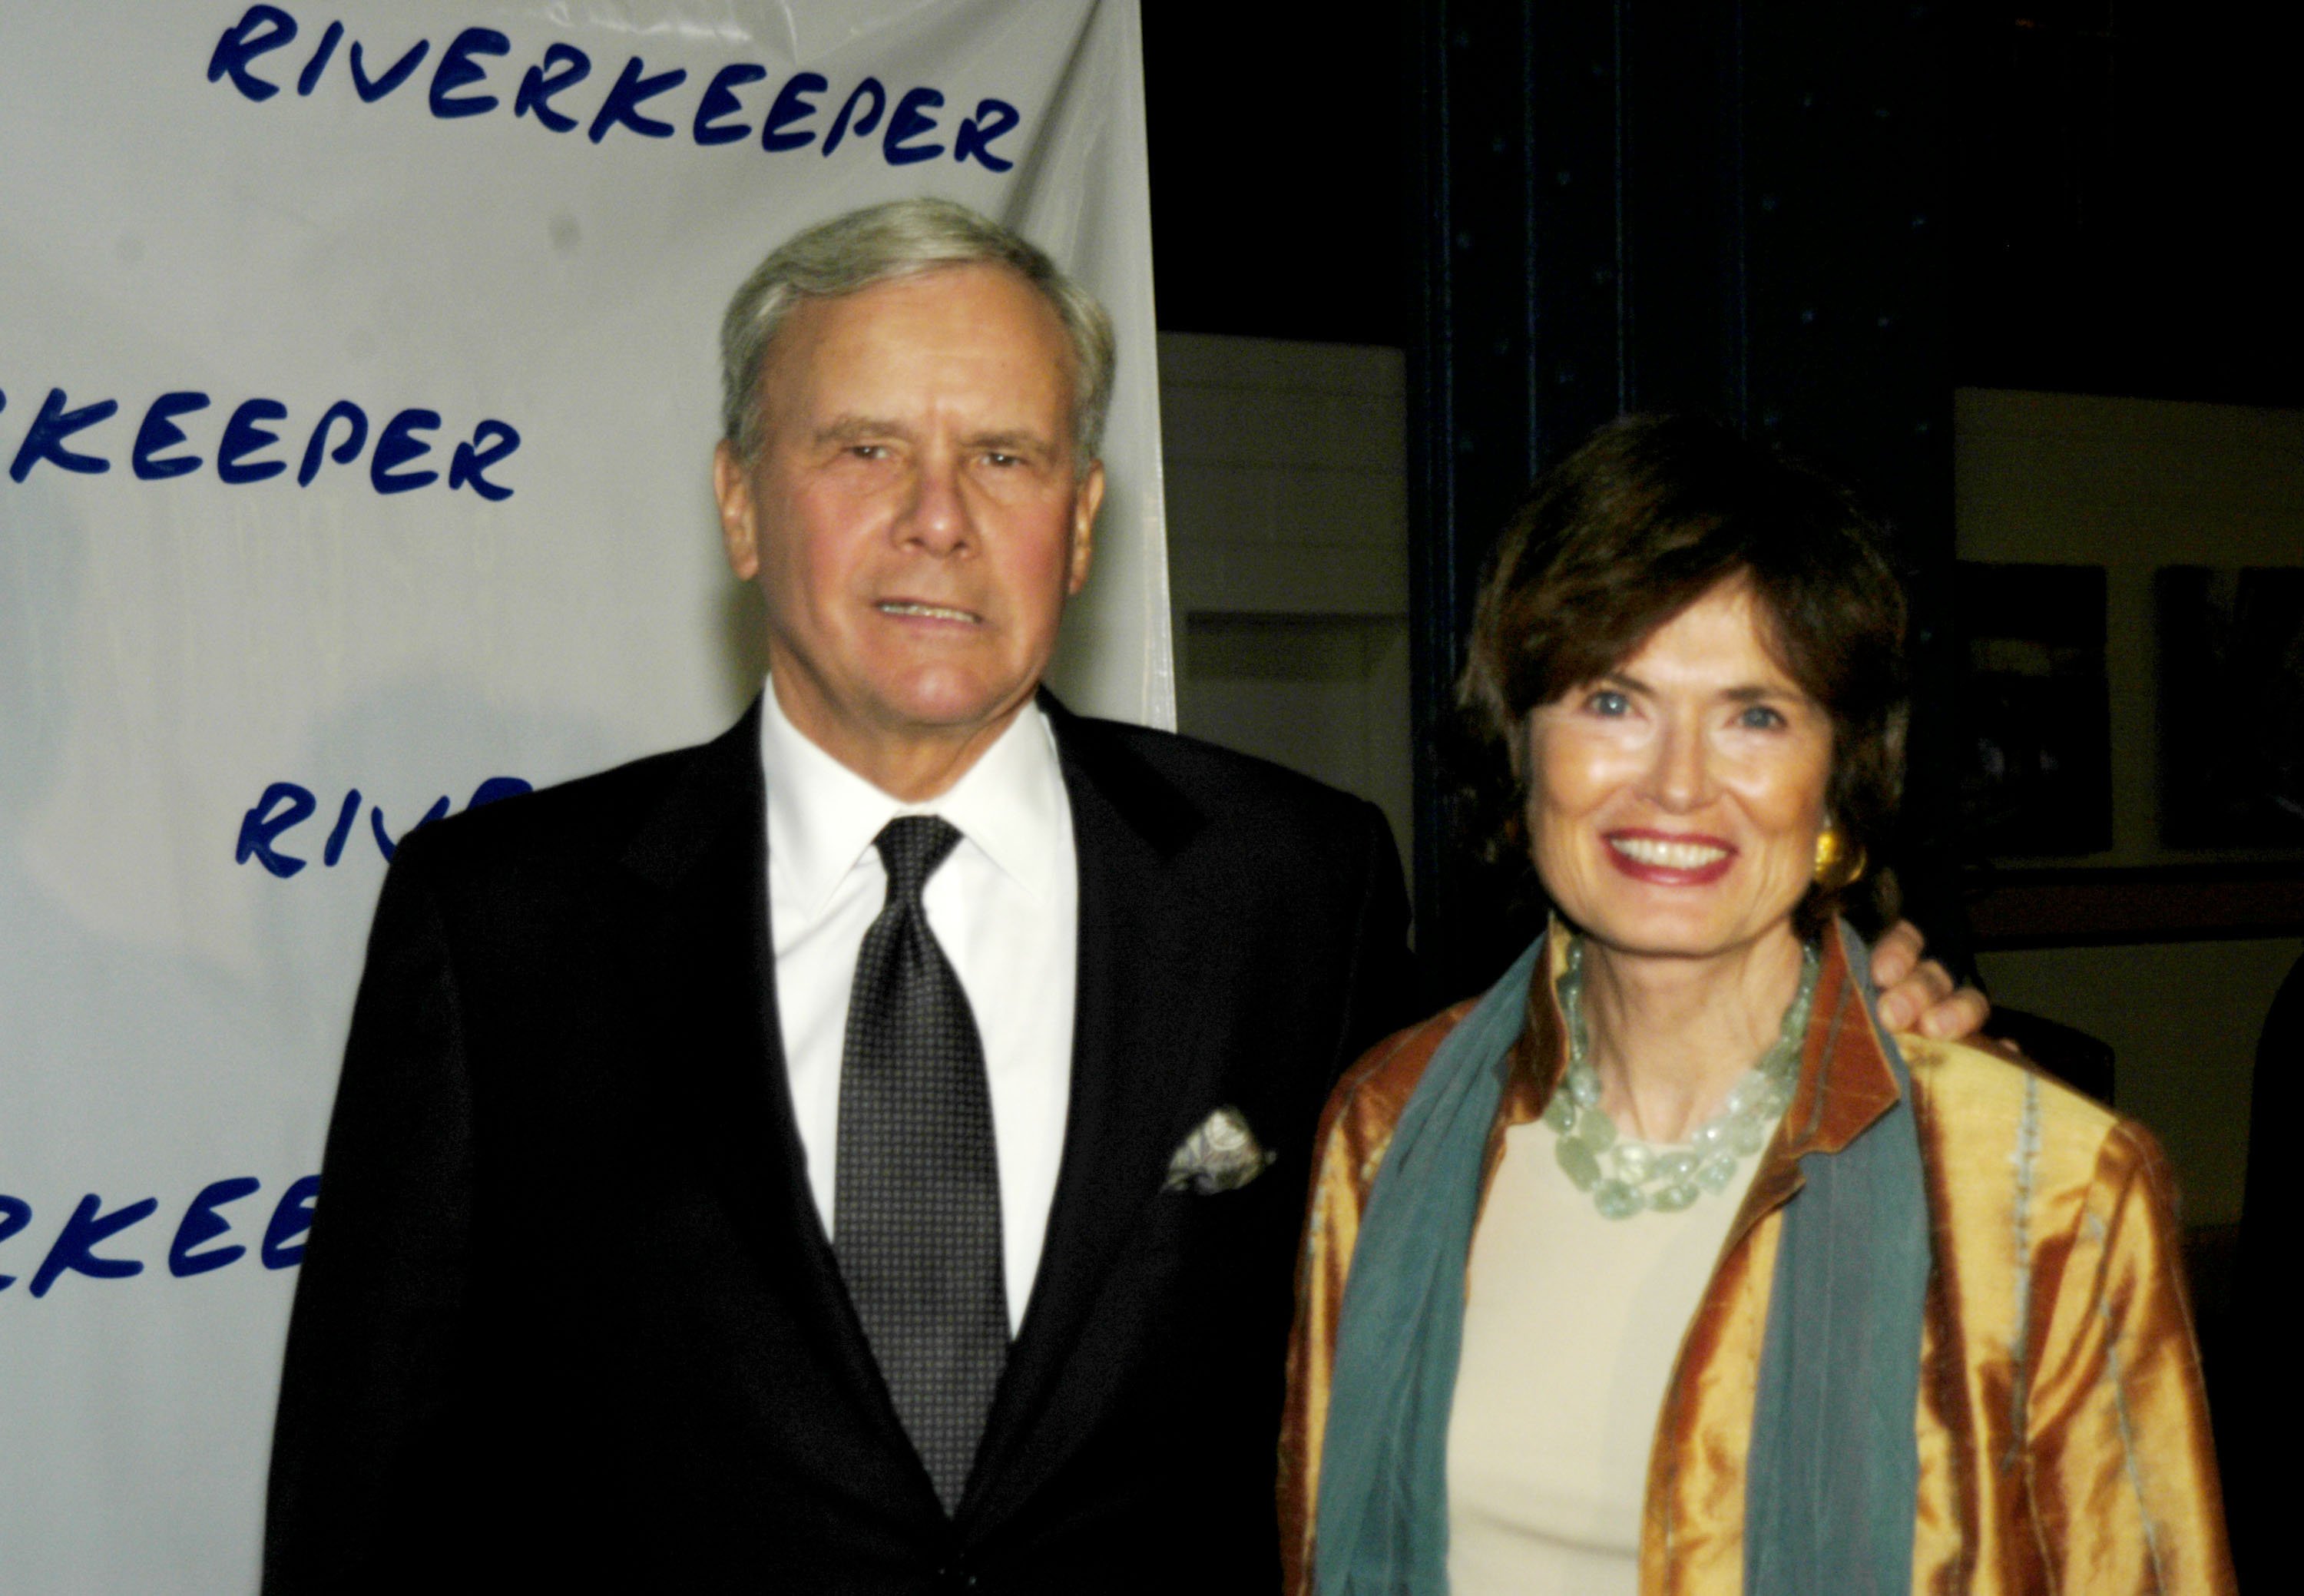 Tom Brokaw and wife Meredith Lynn Auld during The 2004 Riverkeeper Benefit Dinner at Chelsea Piers, Pier 60 in New York City, New York | Source: Getty Images